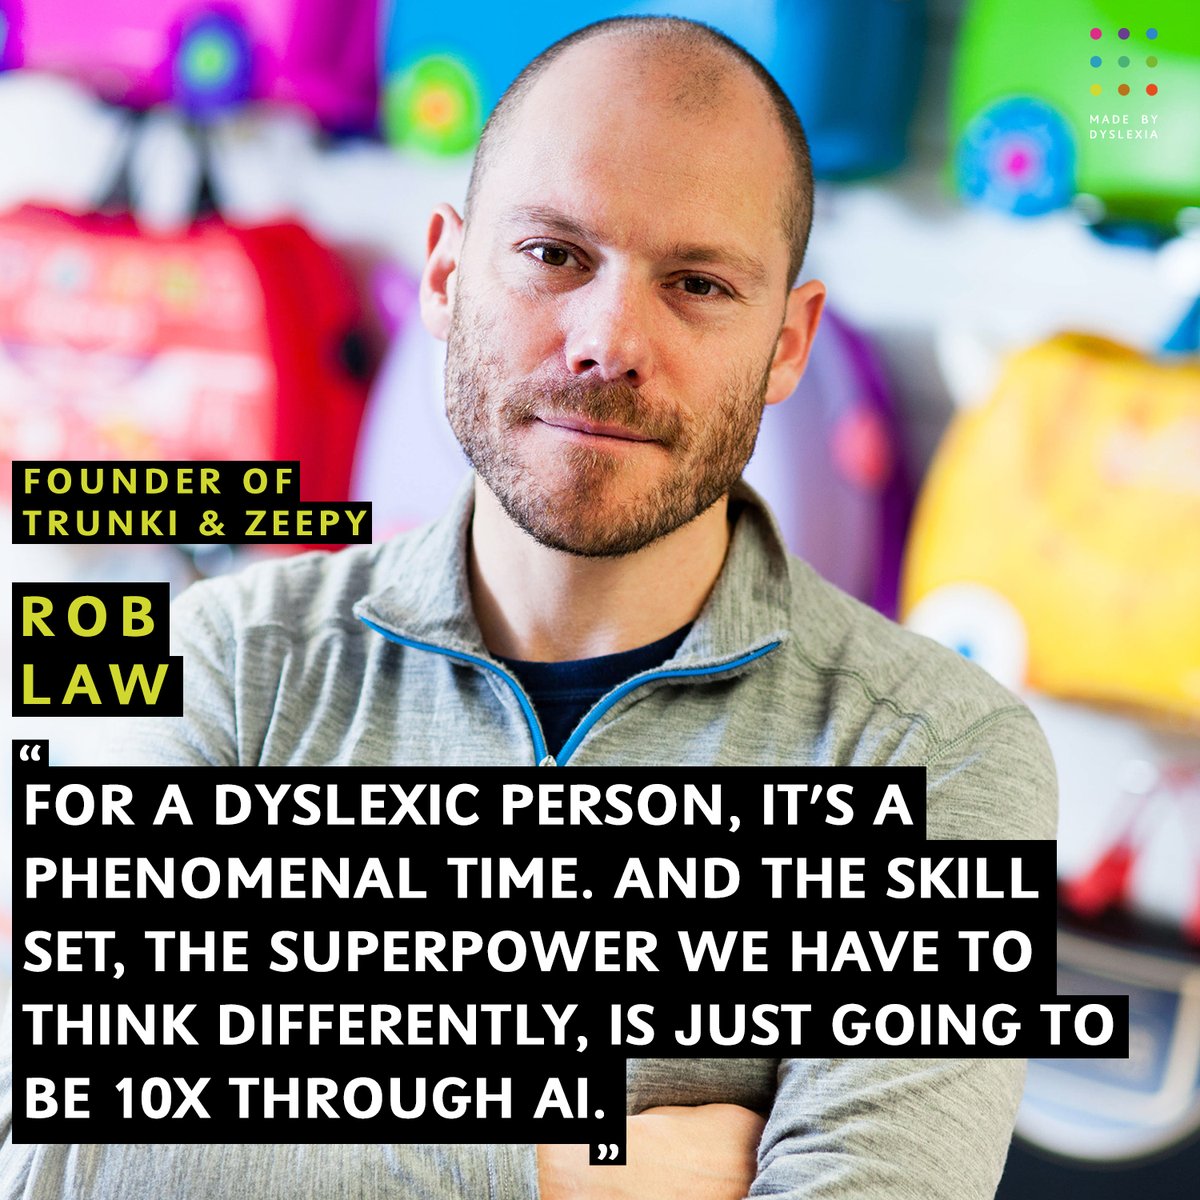 This week’s guest on #LessonsInDyslexicThinking, @trunkidaddy is right! The skills dyslexics are naturally hard-wired to have can be turbo-charged by AI & our dyslexic challenges better supported. Watch the full episode on YouTube: bit.ly/45fuzar